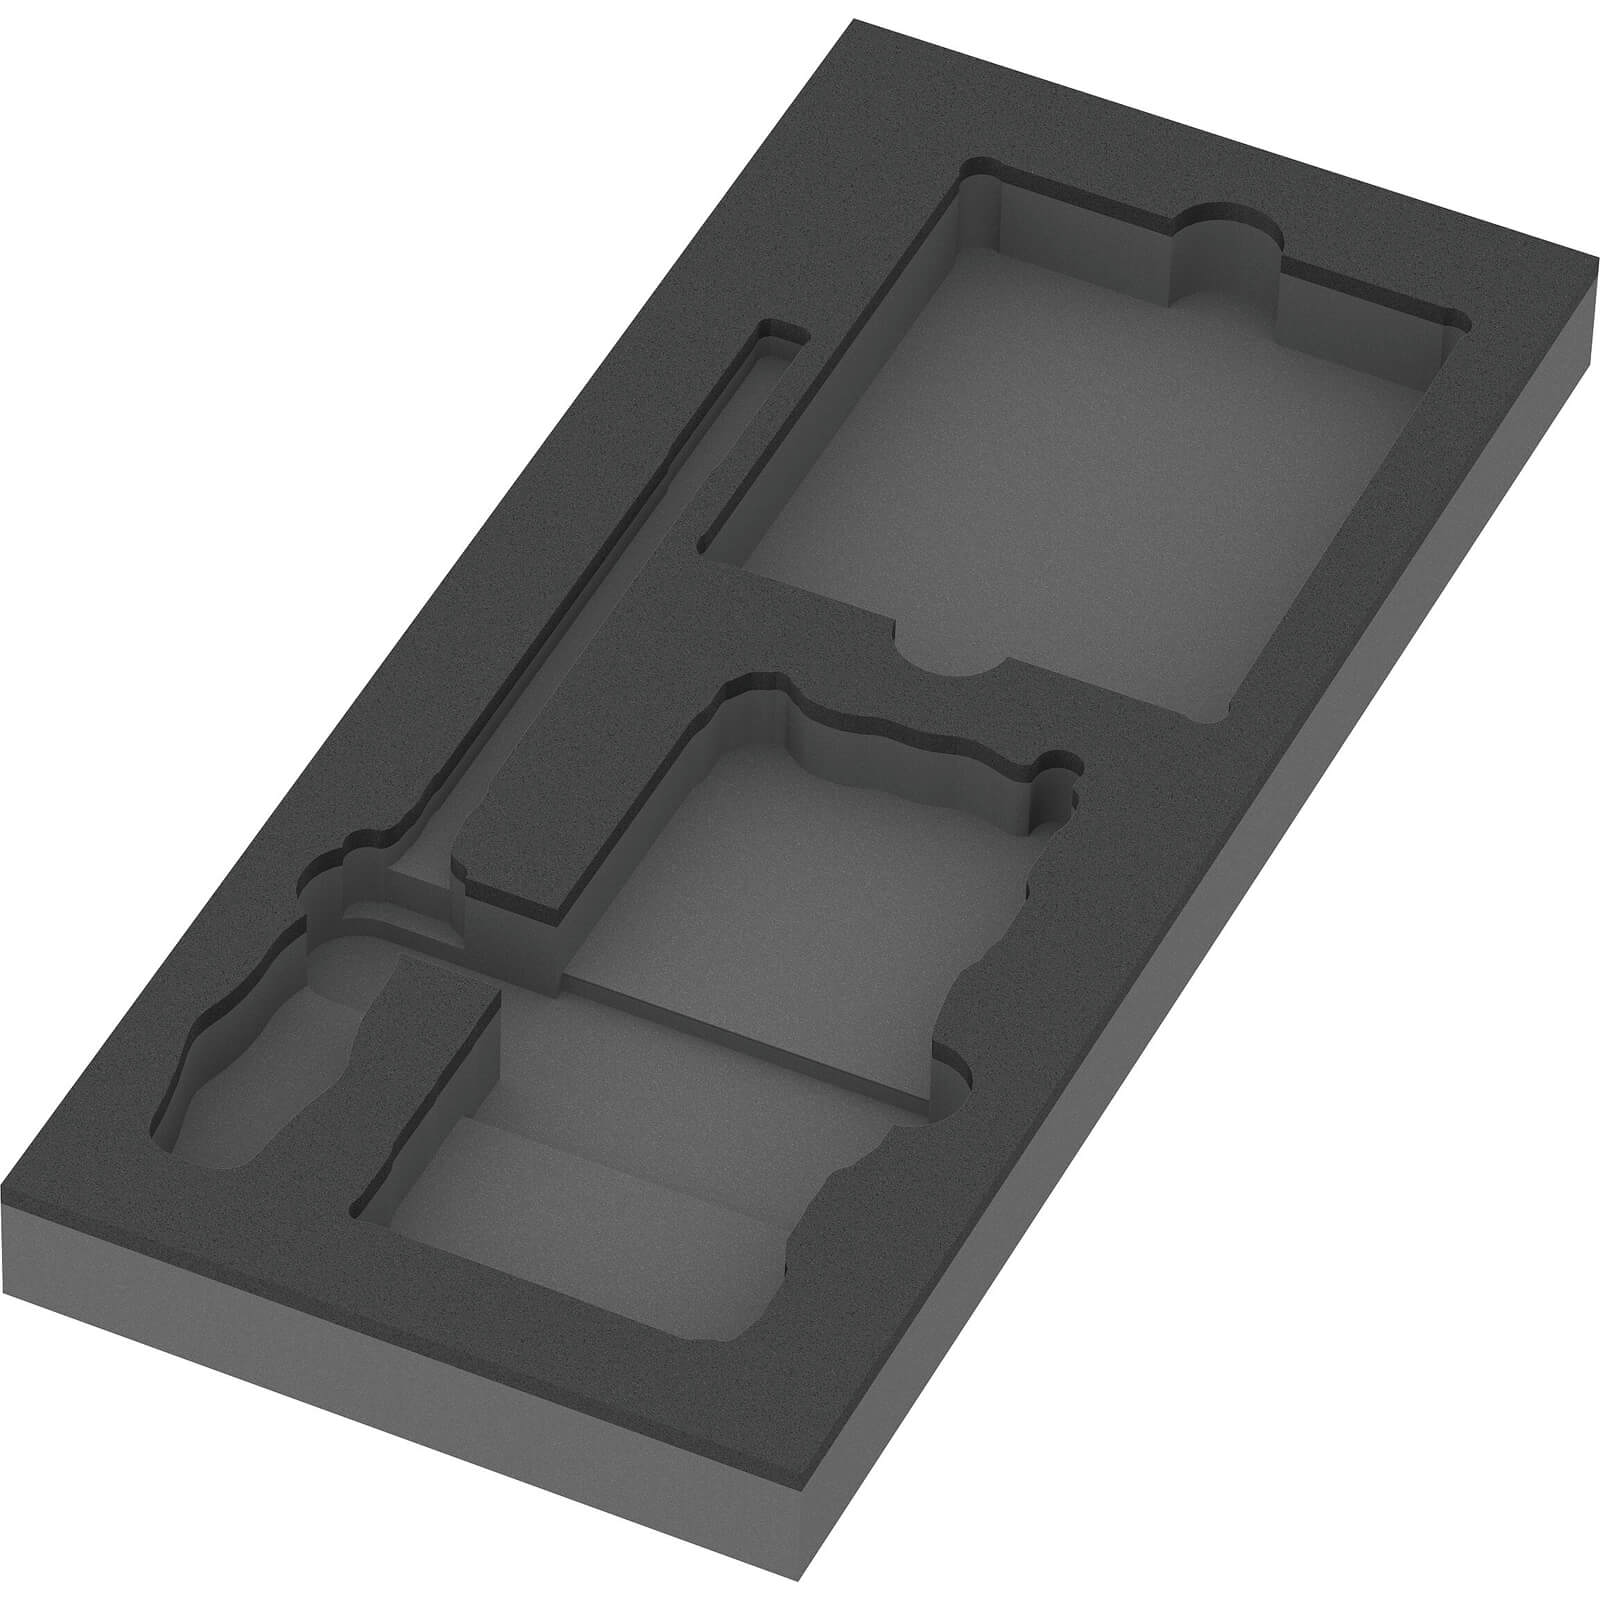 Image of Wera Empty Foam Insert Tray for 9750 KK and Tool Check Plus Set